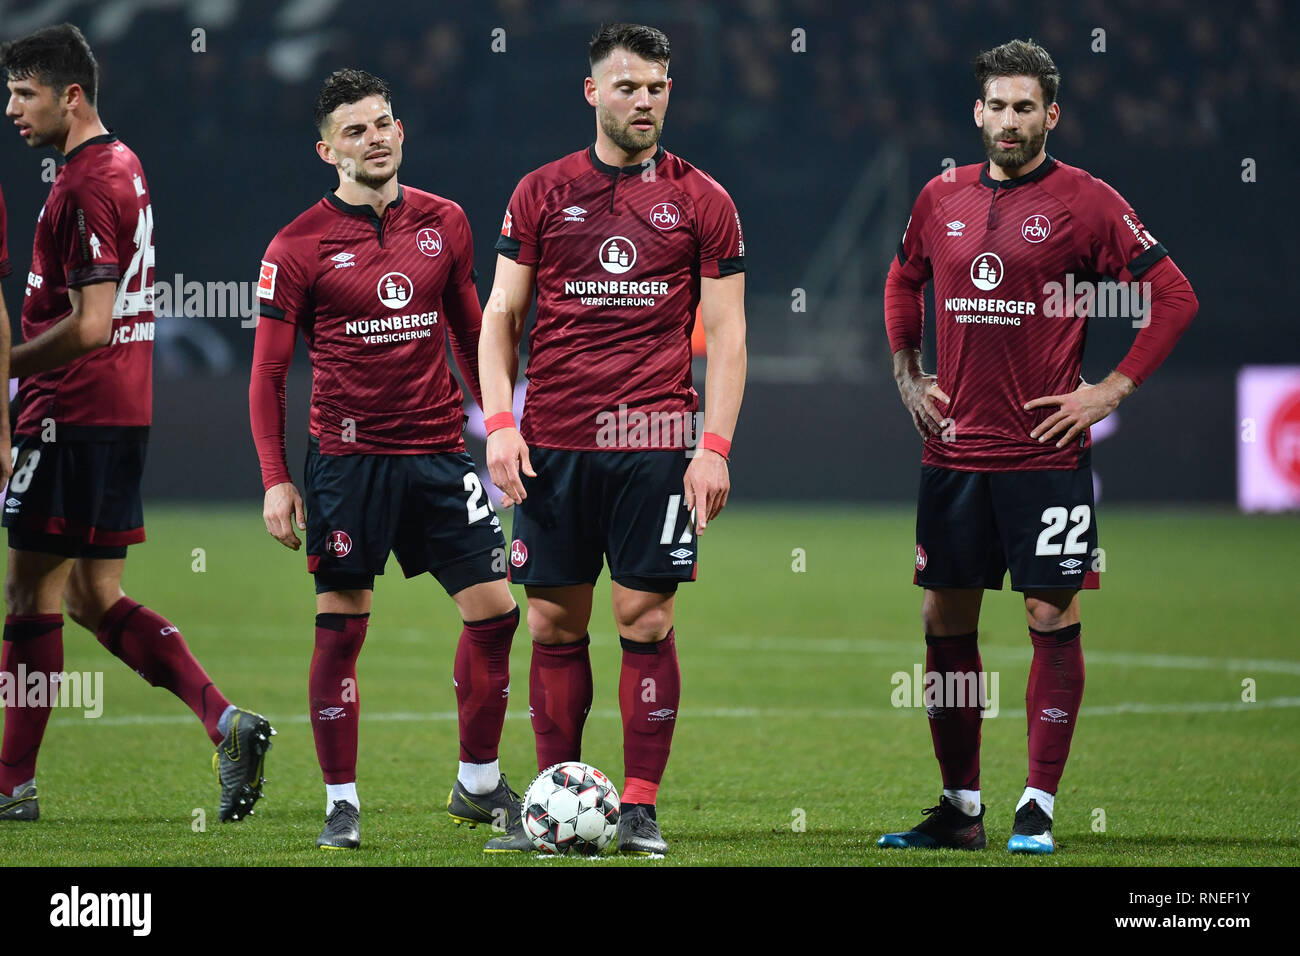 Nuremberg, Germany. 18th Feb, 2019. v.re: Enrico VALENTINI (1.FC Nuremberg), Eduard LOEWEN (1.FC Nuremberg), Tim LEIBOLD (1.FC Nuremberg), Lukas MUEHL (1.FC Nuremberg), promotion. Soccer 1. Bundesliga, 22.matchday, matchday22, 1.FC Nuremberg (N) - Borussia Dortmund (DO) 0-0, on 18/02/2019 in Nuernberg / Germany. MAX MORLOCK STADIUM. DFL REGULATIONS PROHIBIT ANY USE OF PHOTOGRAPH AS IMAGE SEQUENCES AND / OR QUASI VIDEO. | usage worldwide Credit: dpa picture alliance/Alamy Live News Stock Photo